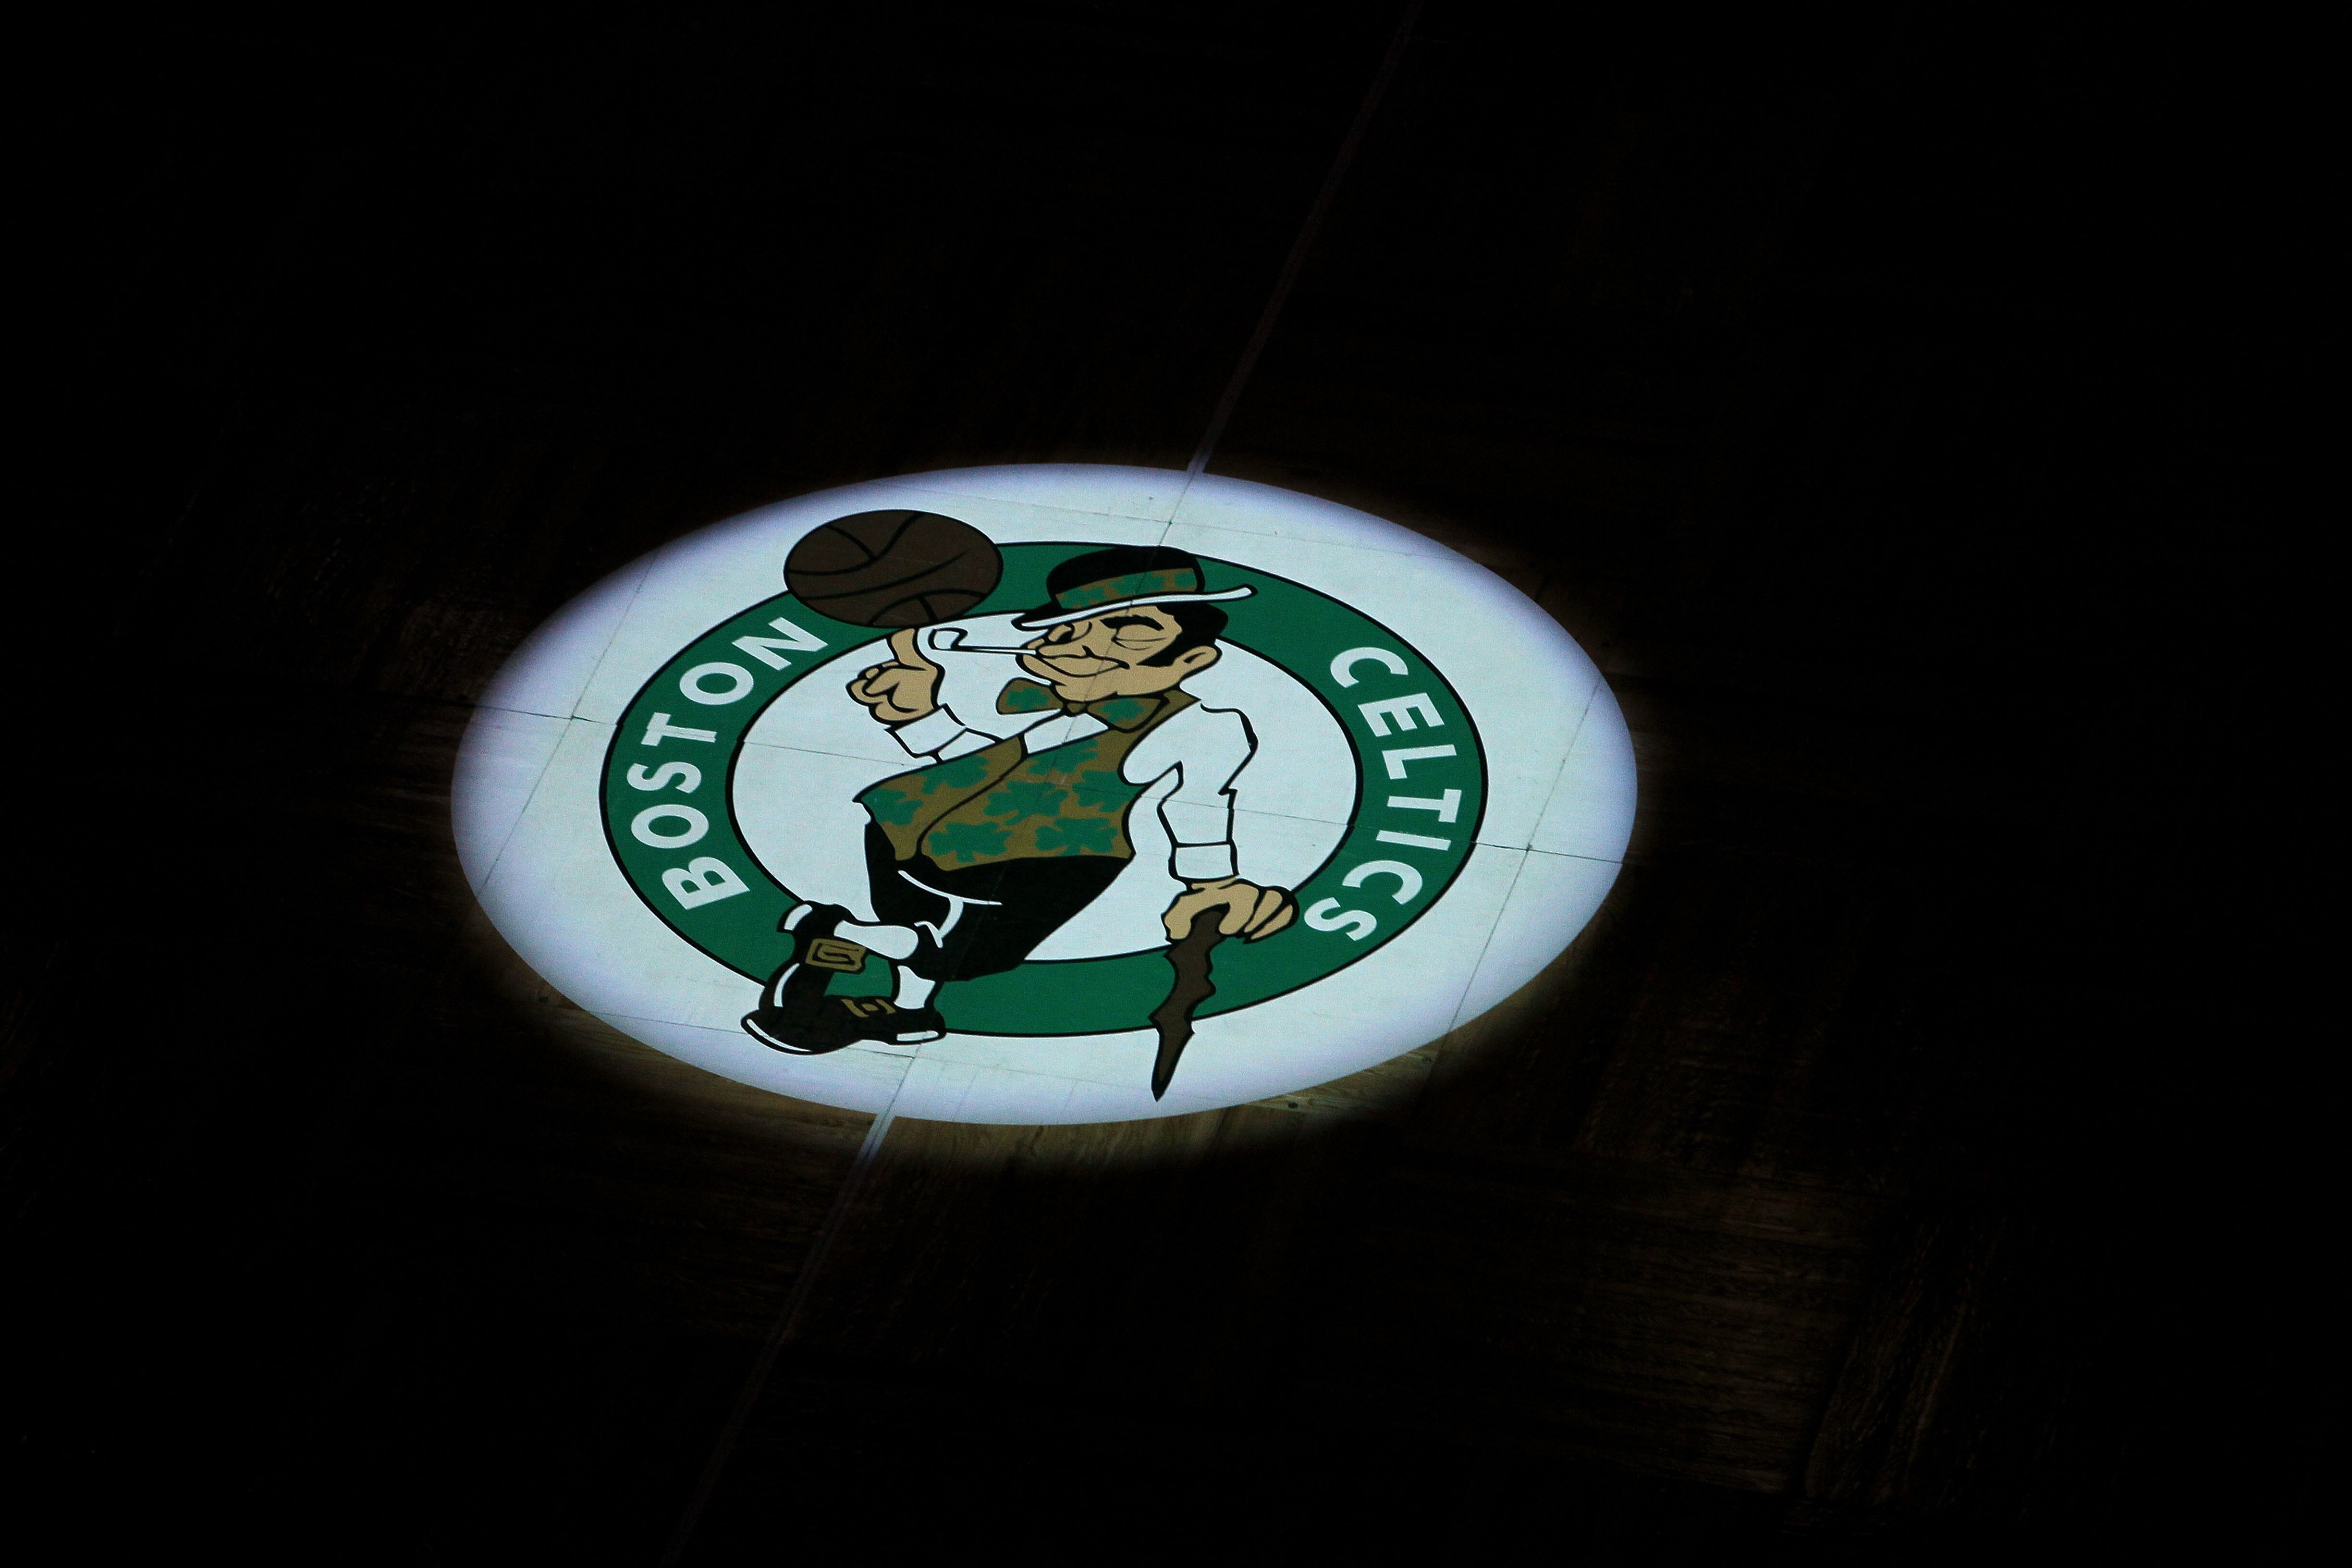 BOSTON - JUNE 10:  A detail of the Boston Celtics logo as the Celtics get set to play against the Los Angeles Lakers during Game Four of the 2010 NBA Finals on June 10, 2010 at TD Garden in Boston, Massachusetts. NOTE TO USER: User expressly acknowledges